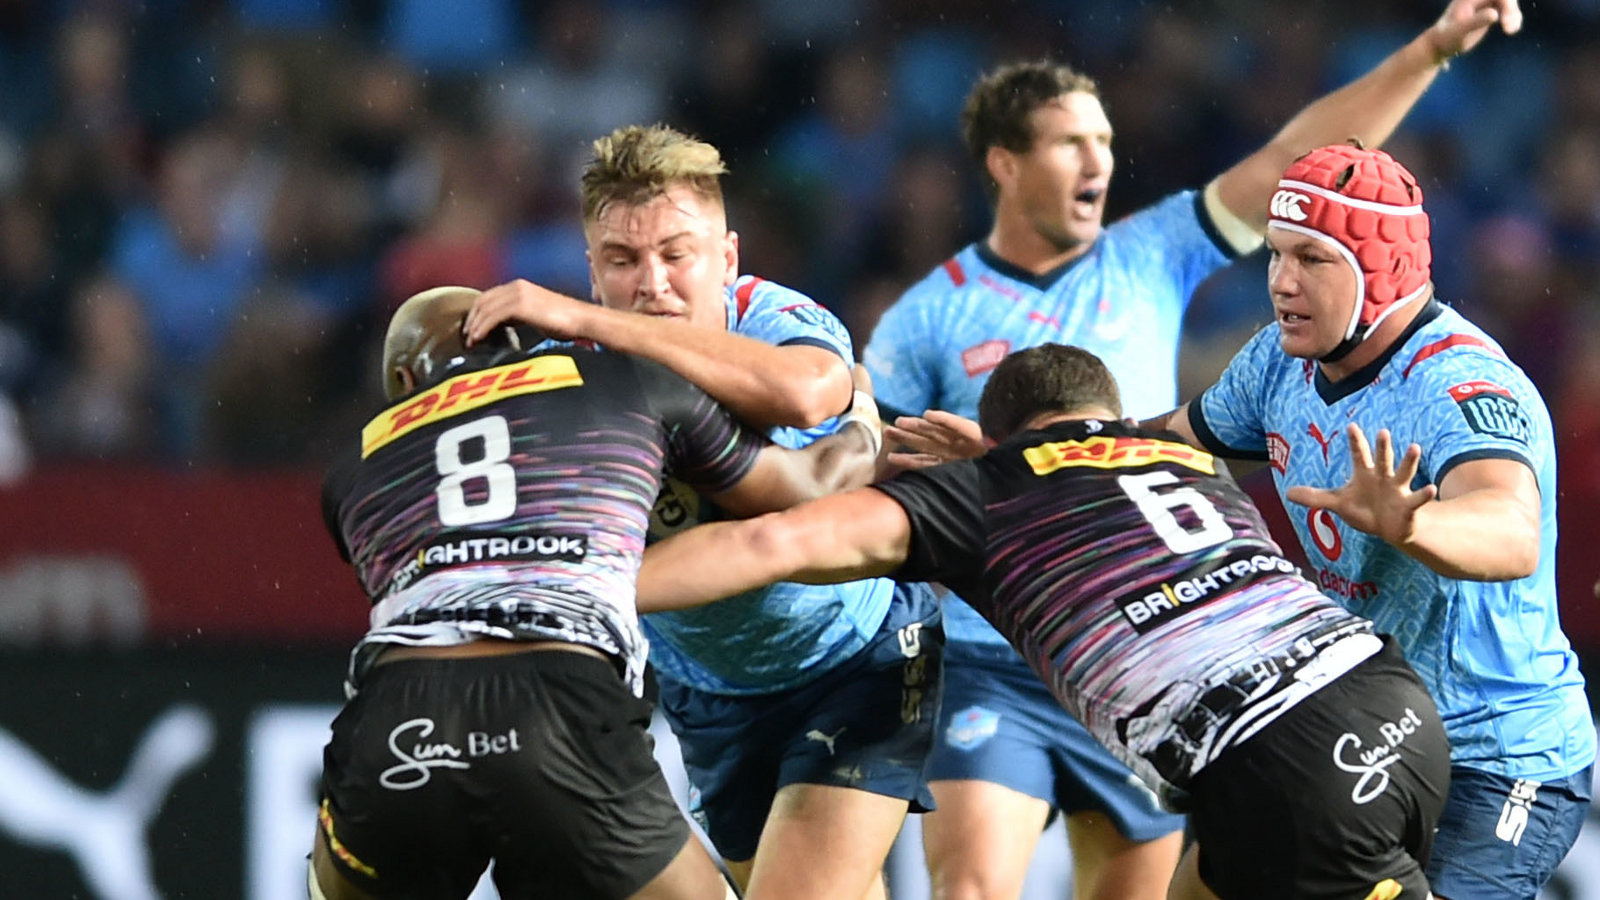 bulls v stormers: four takeaways from a classic south african north-south derby